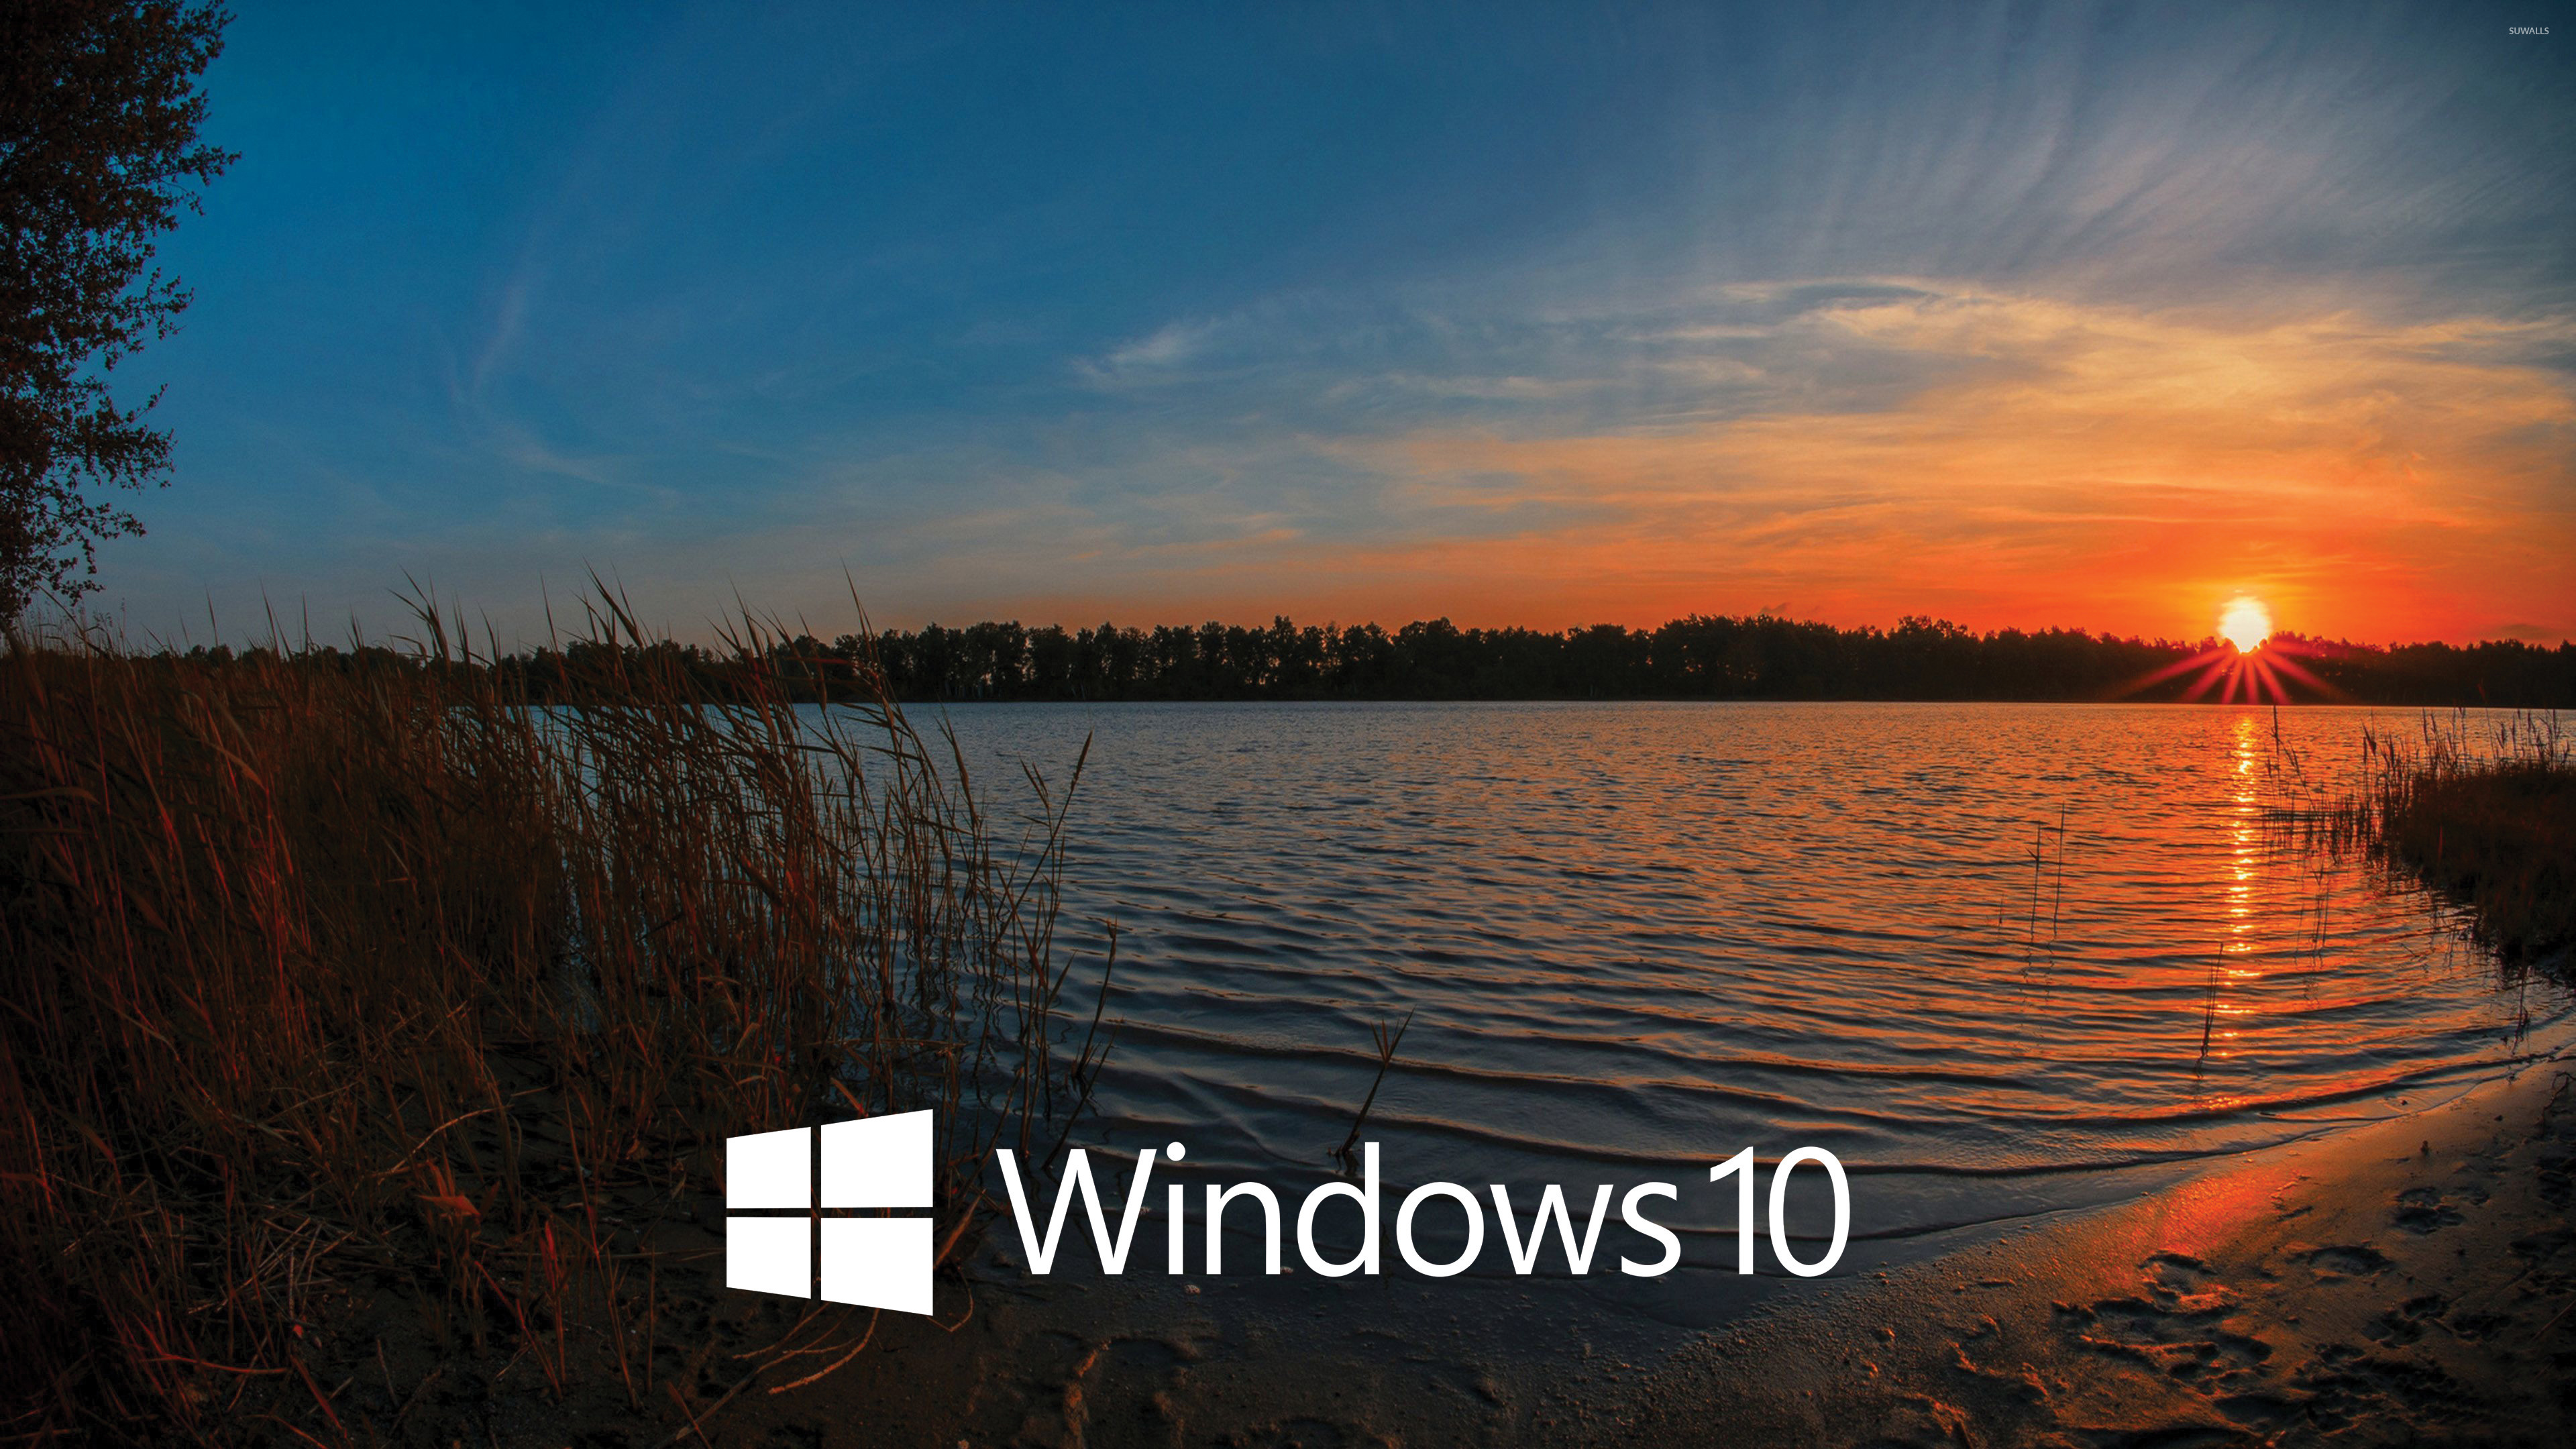 Windows 10 White Text Logo In The Sunset Wallpaper - Windows 10 , HD Wallpaper & Backgrounds